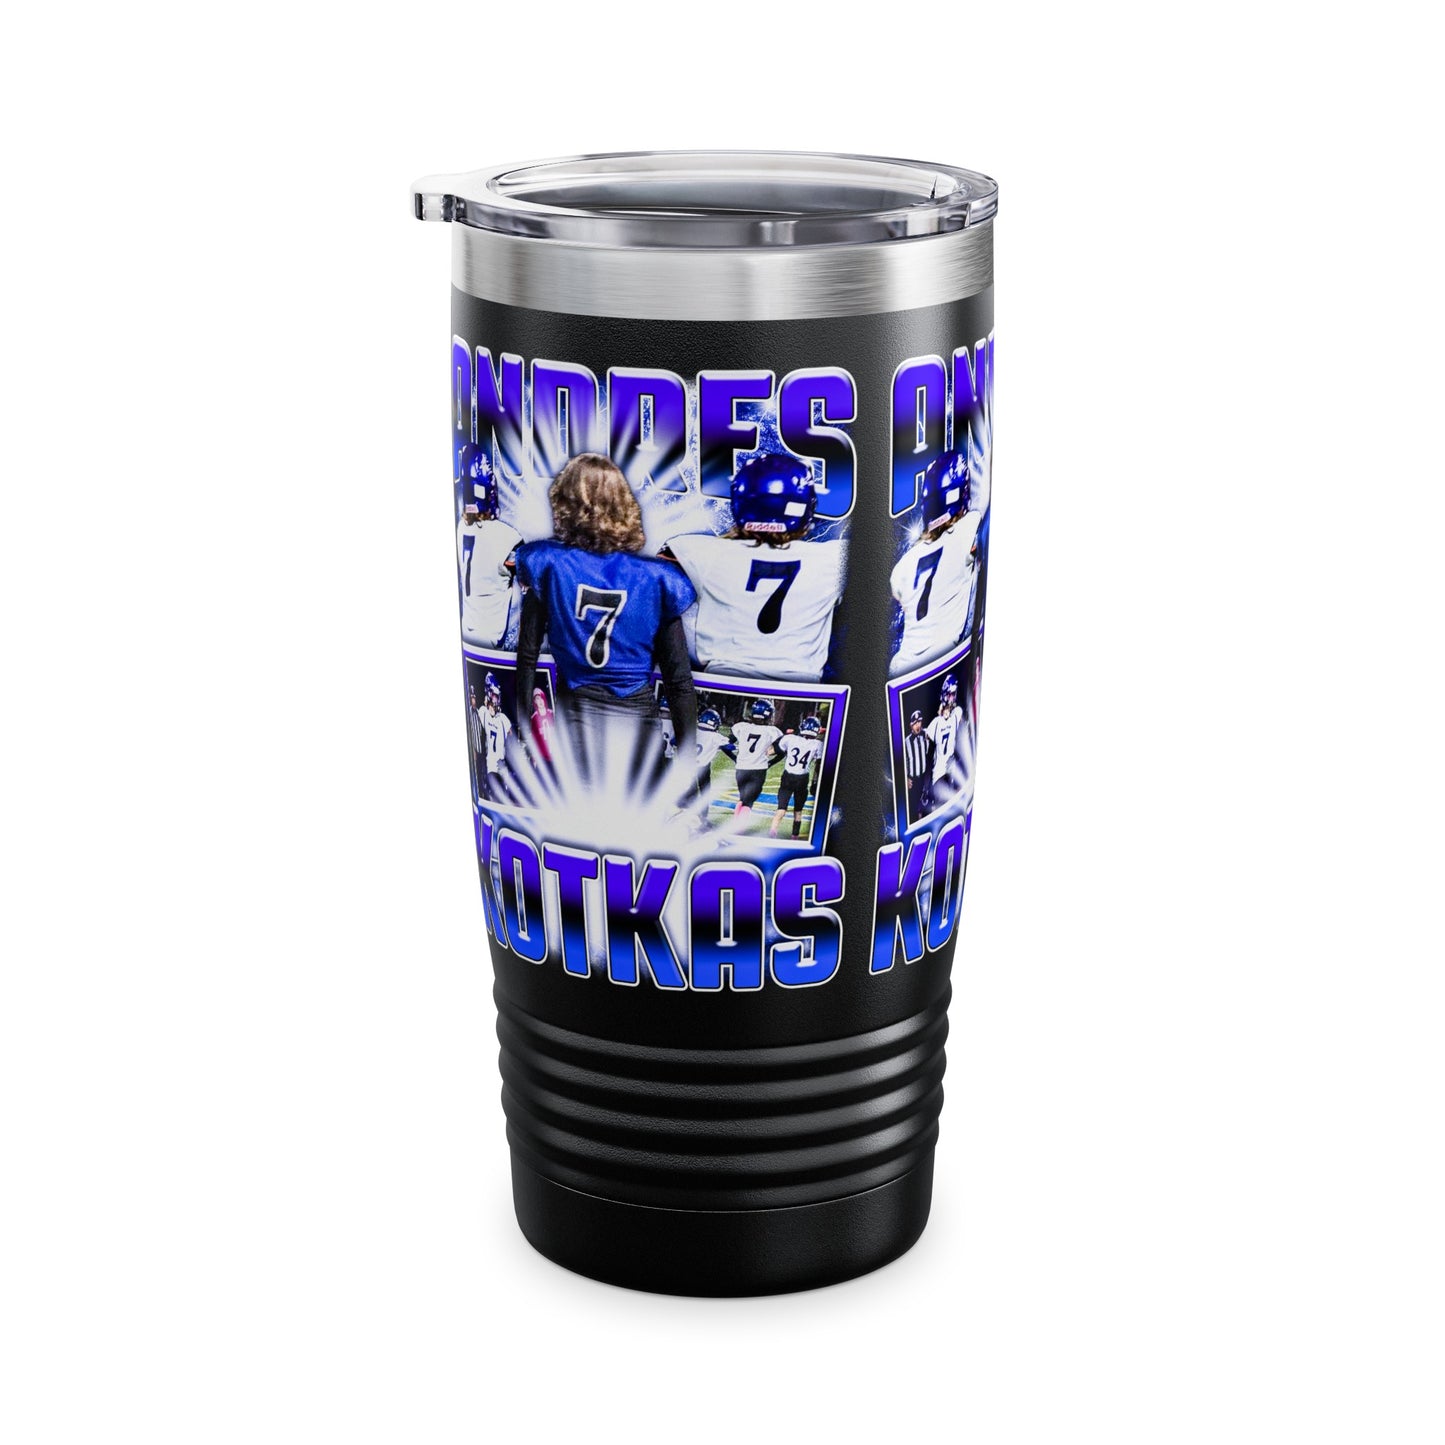 Andres Kotkas Stainless Steal Tumbler